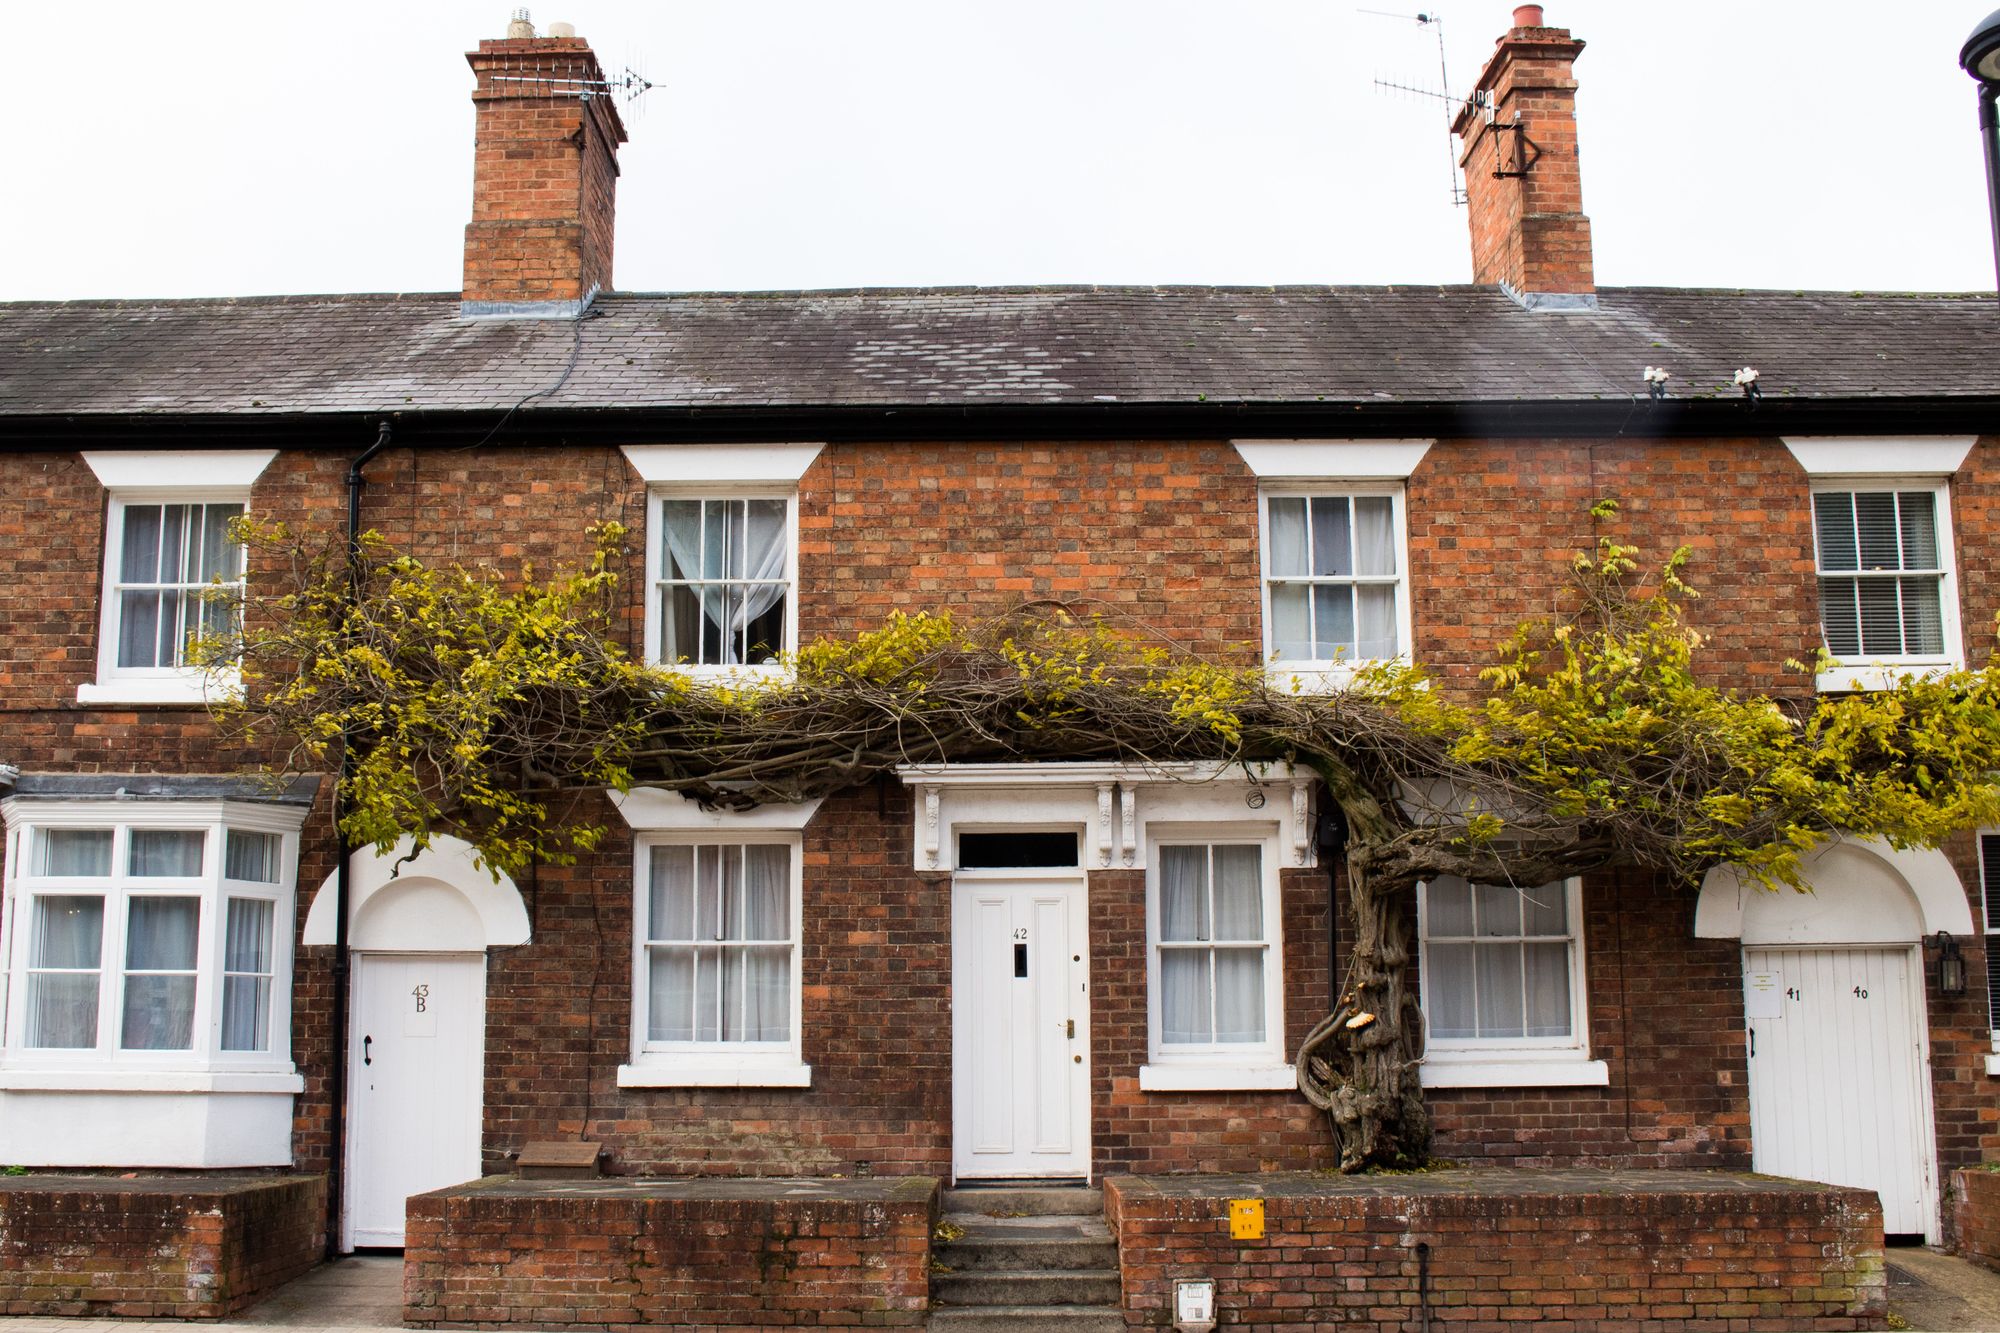 Terraced house with tree growing on side.